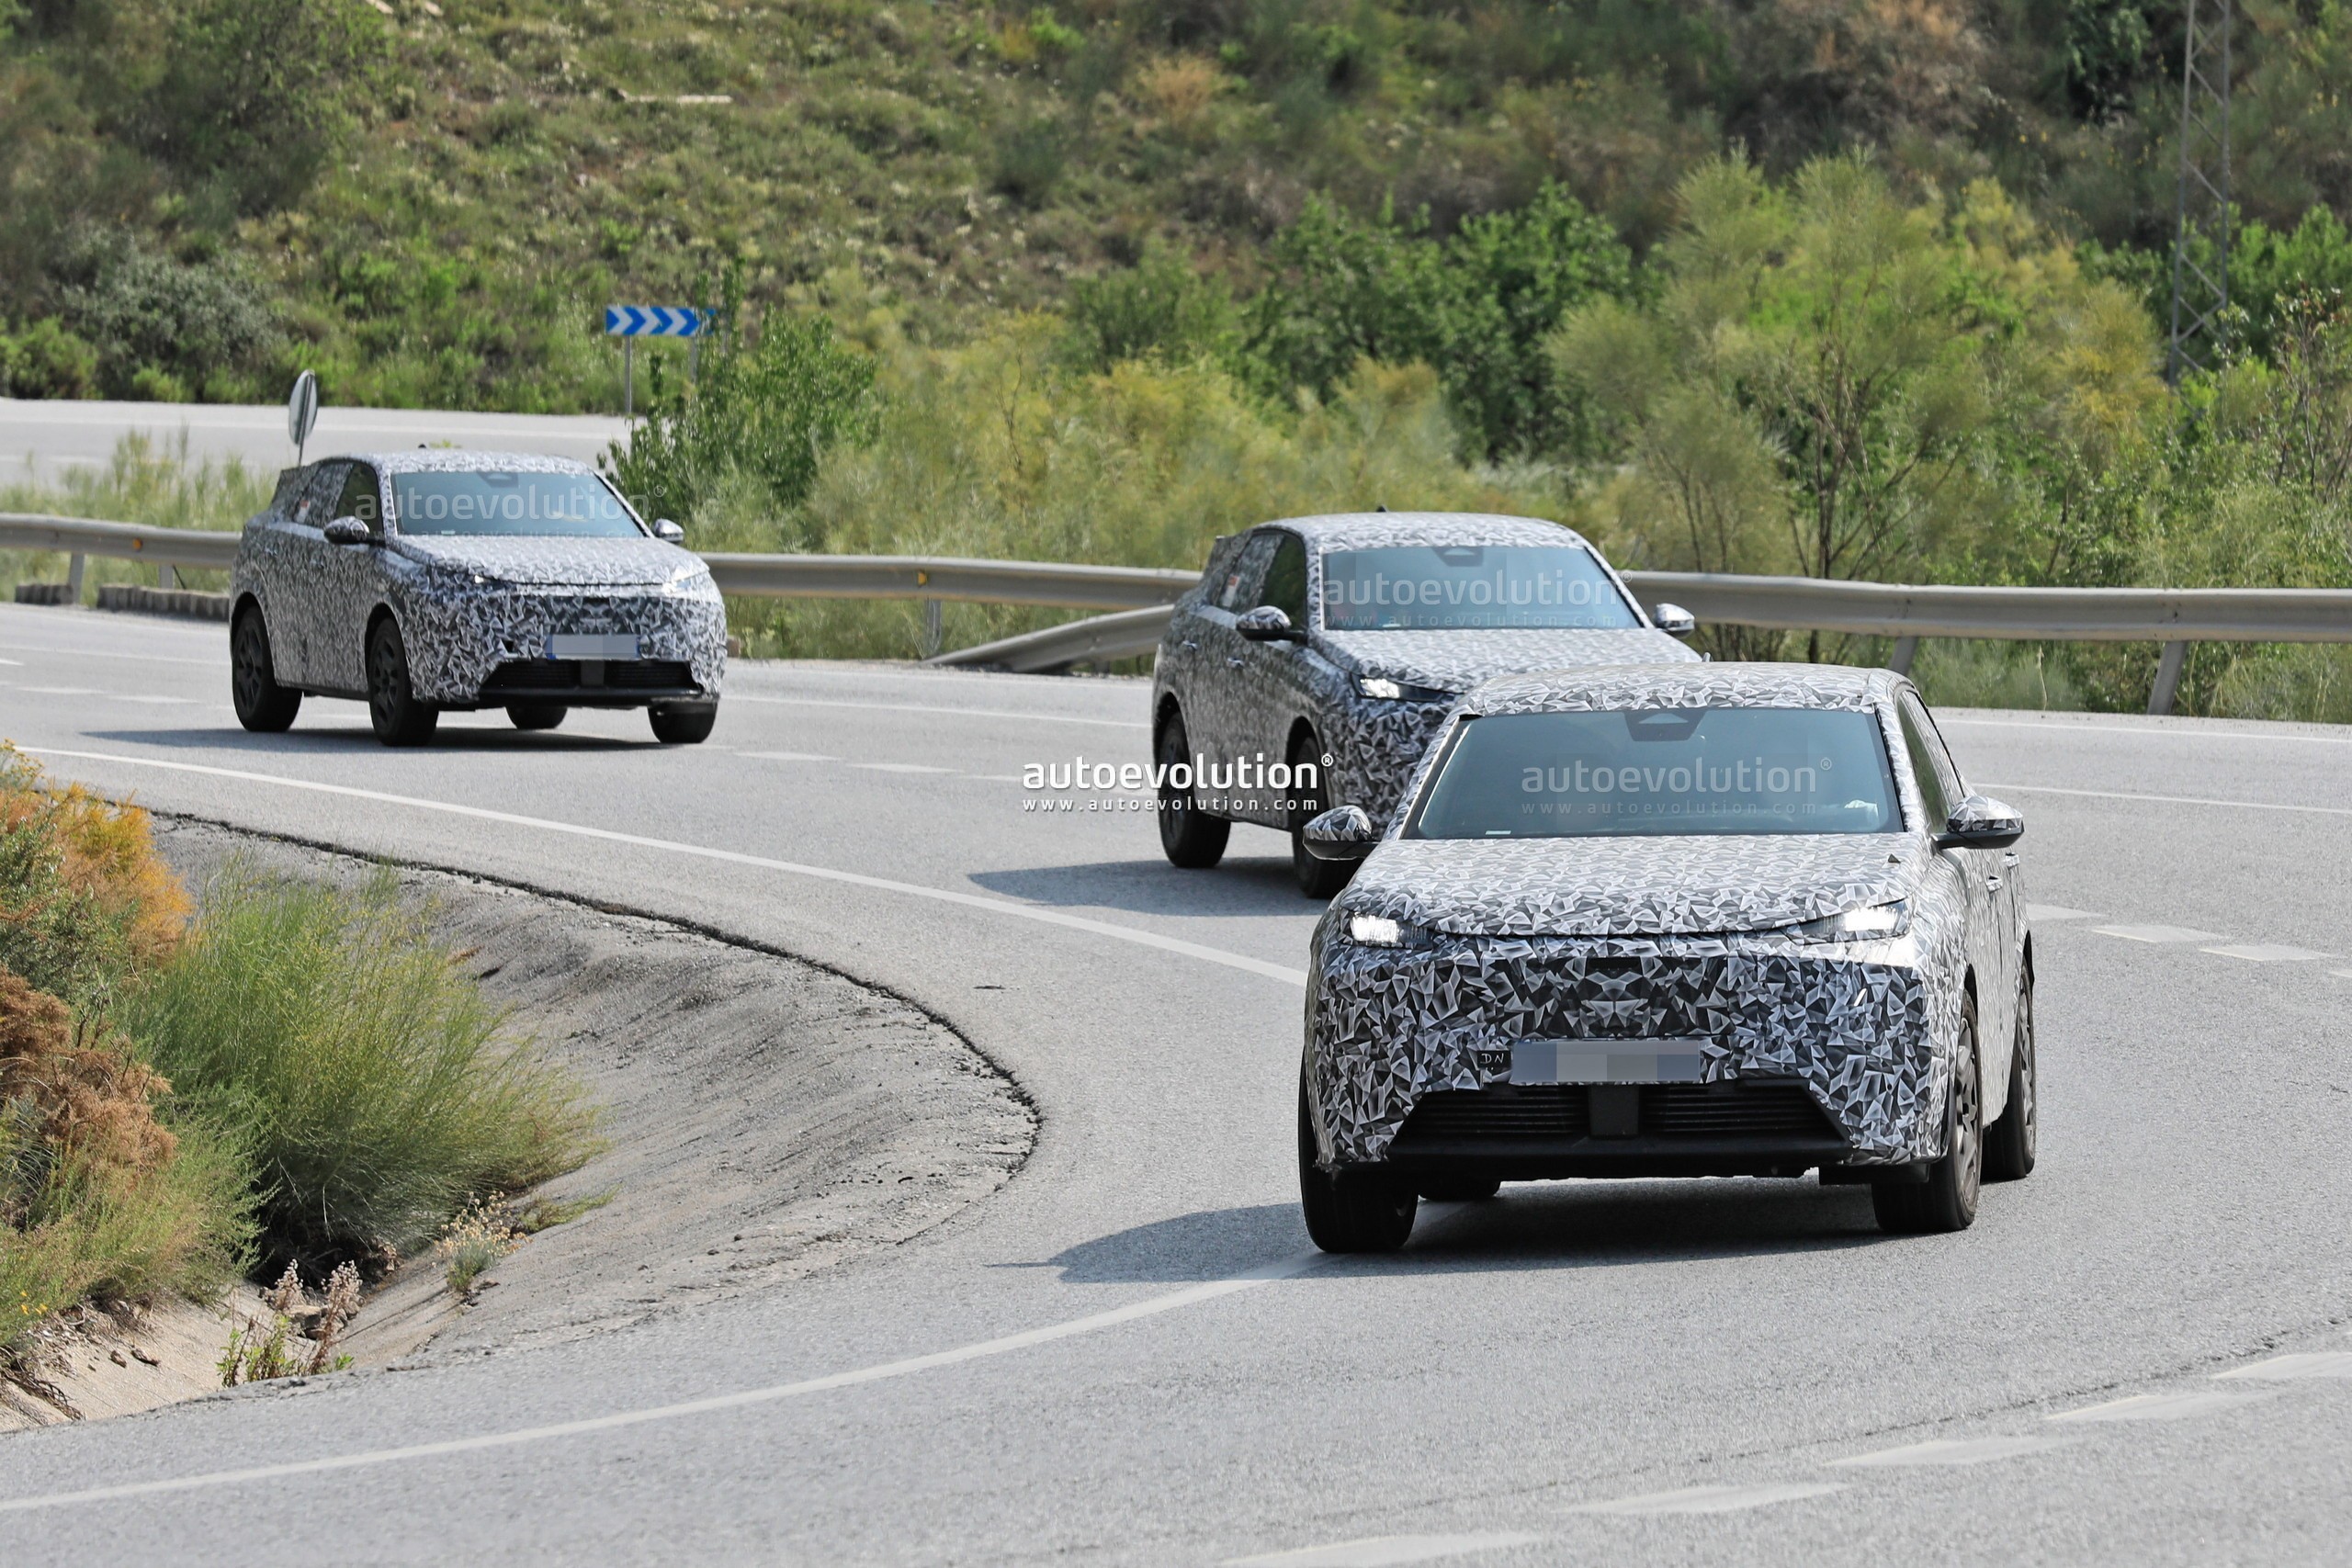 Third-Gen Peugeot 3008 Rendered After New Spy Photos With 408 Design Cues